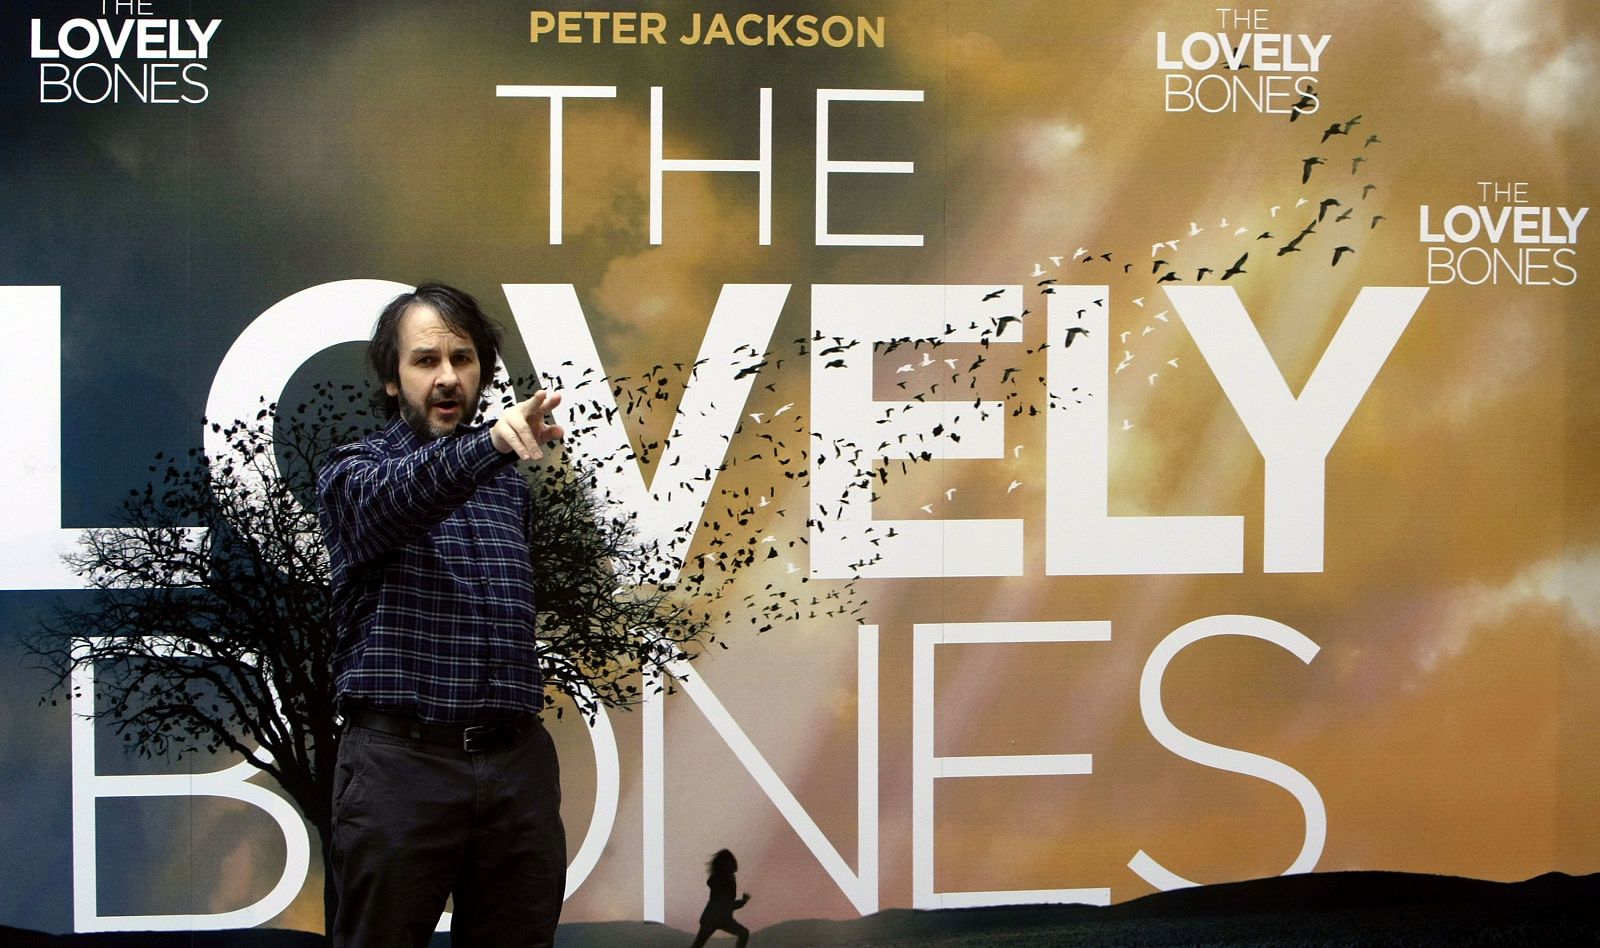 Film director Jackson gestures during a photocall to promote his latest film The Lovely Bones in Madrid